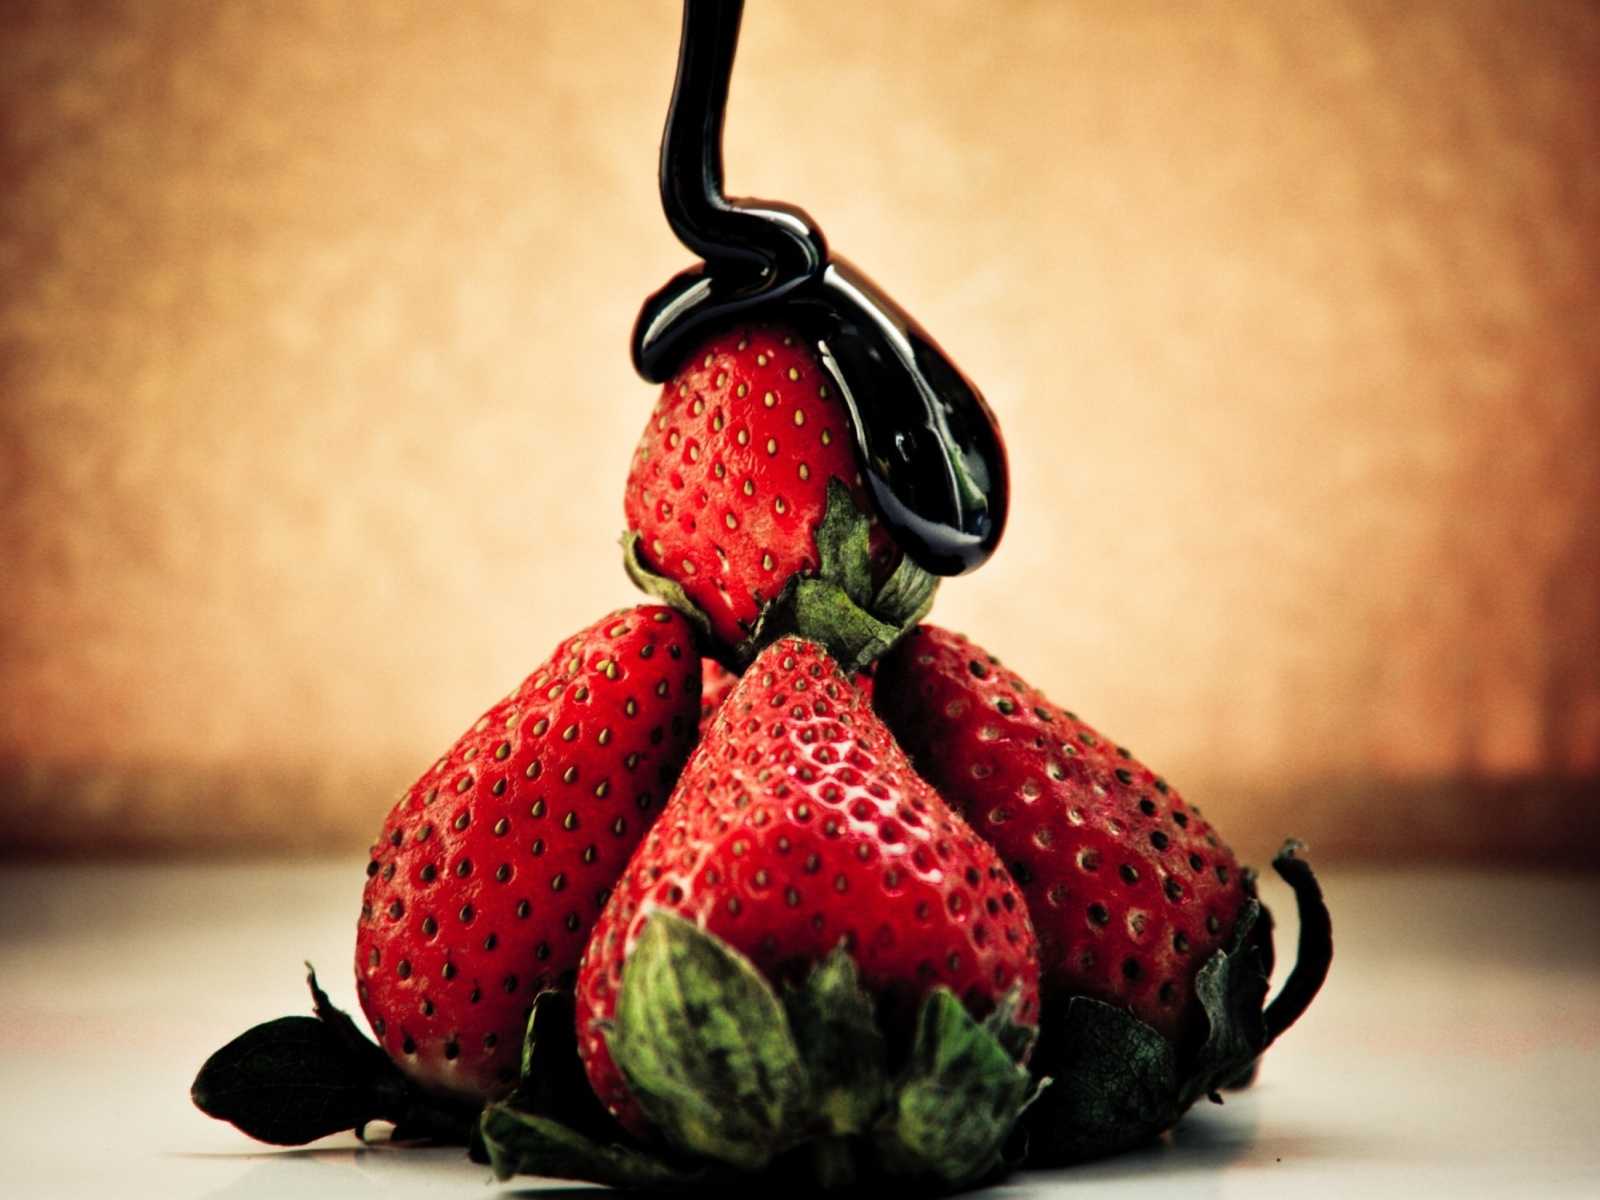 Das Strawberries with chocolate Wallpaper 1600x1200